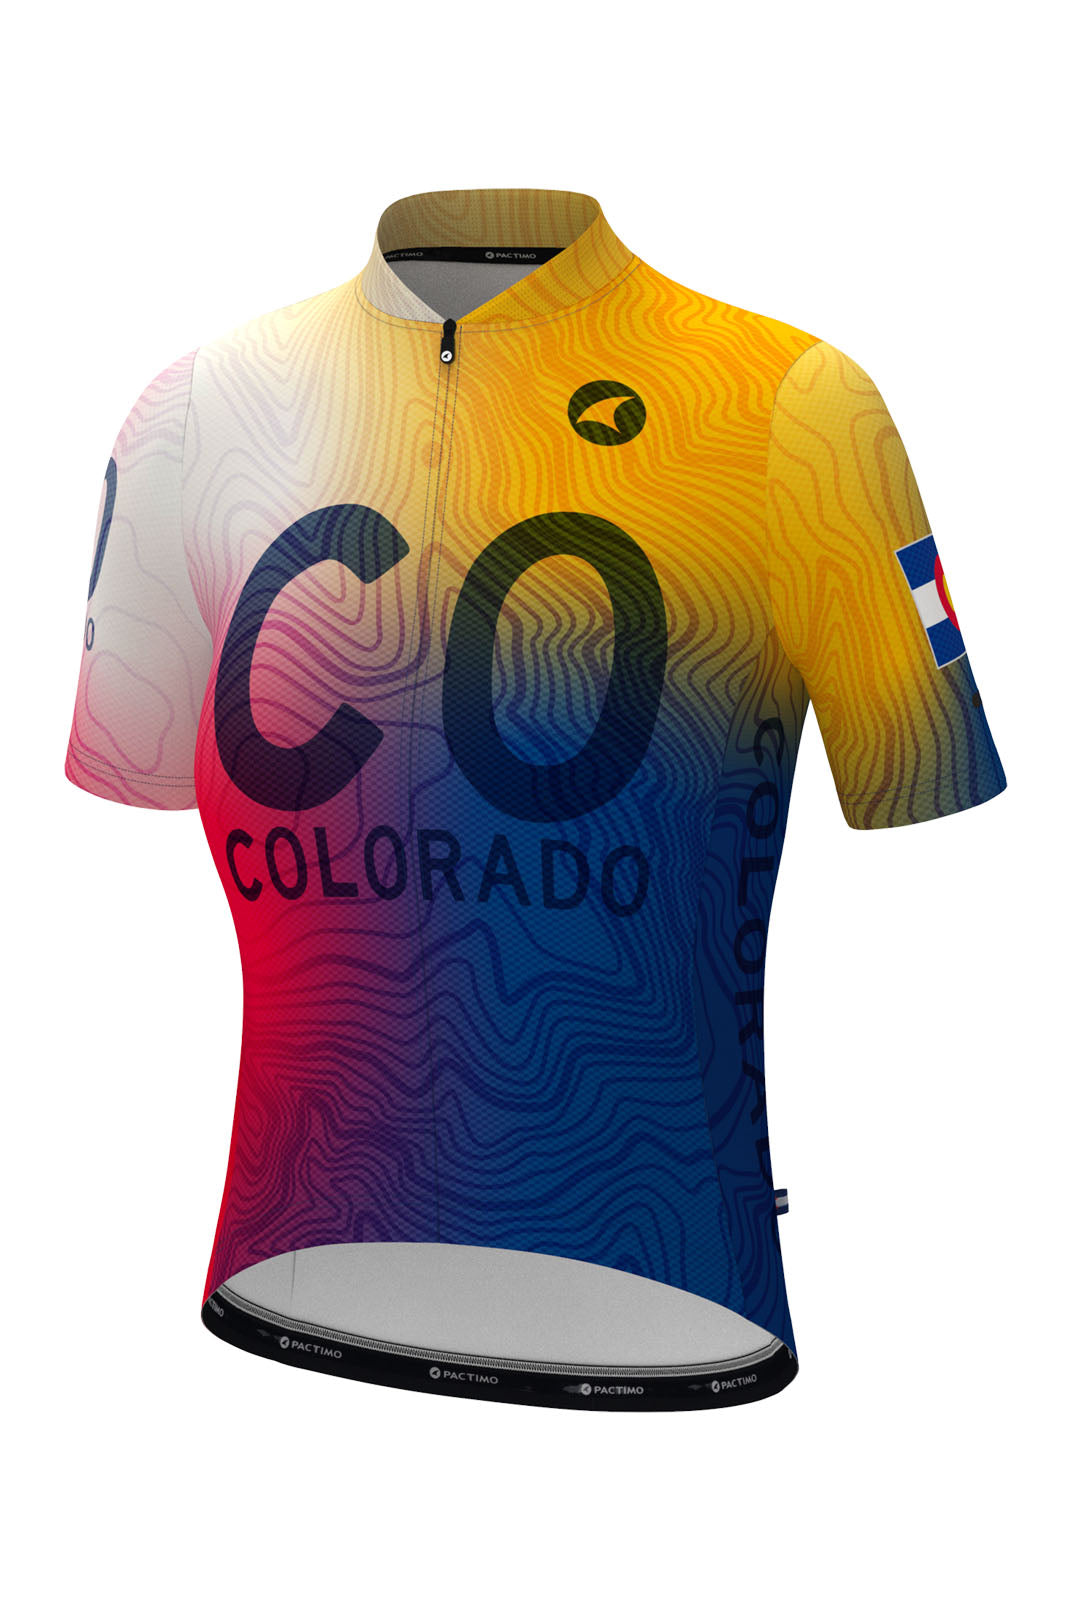 Women's Colorado Contour Flag Cycling Jersey - Front View